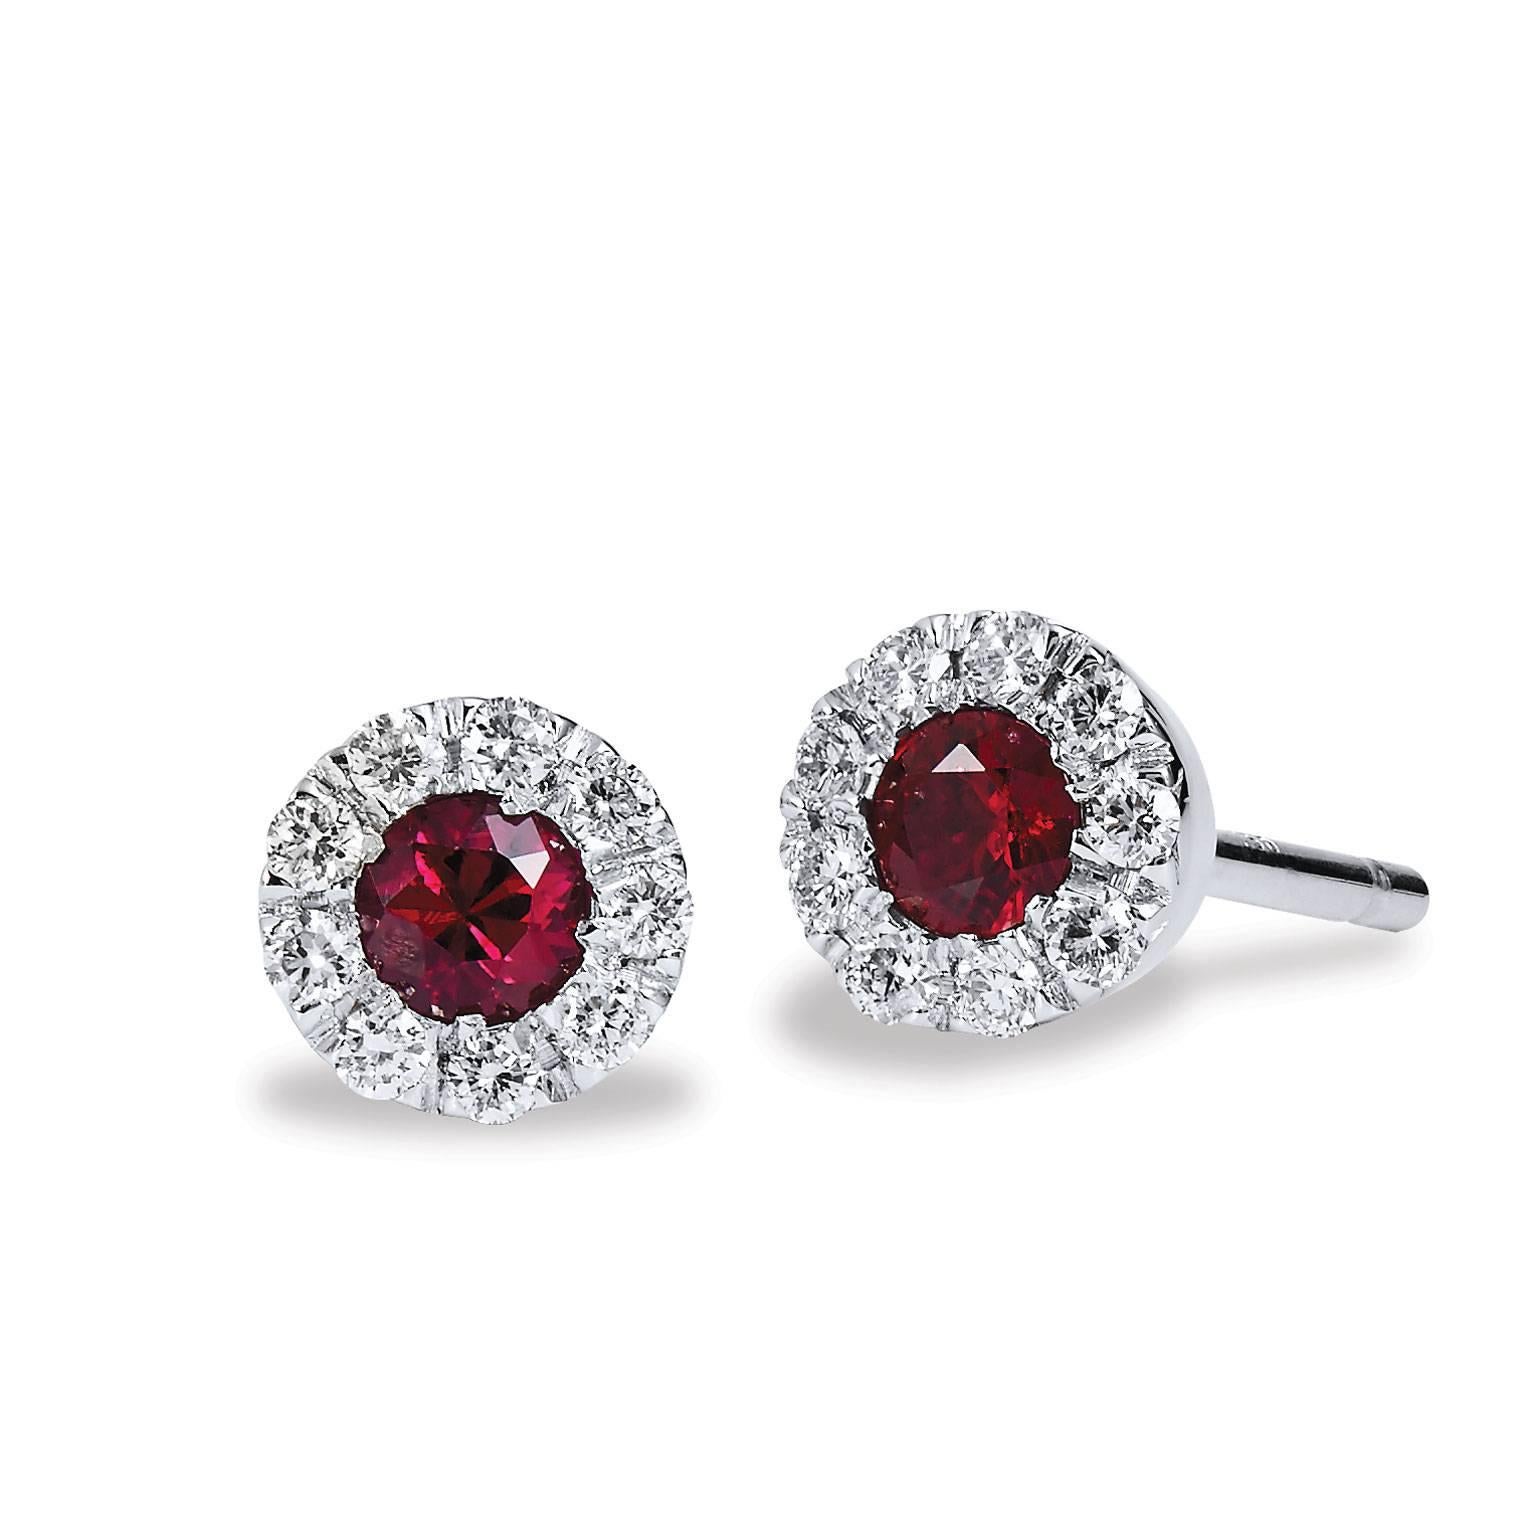 Delicate Ruby and Diamond Earrings , crafted in Eighteen Karat White Gold with two round, three millimeter rubies which
are encircled by nine round brilliant cut diamonds (18 total)
The Rubies are .25 carats total weight and the diamonds weight